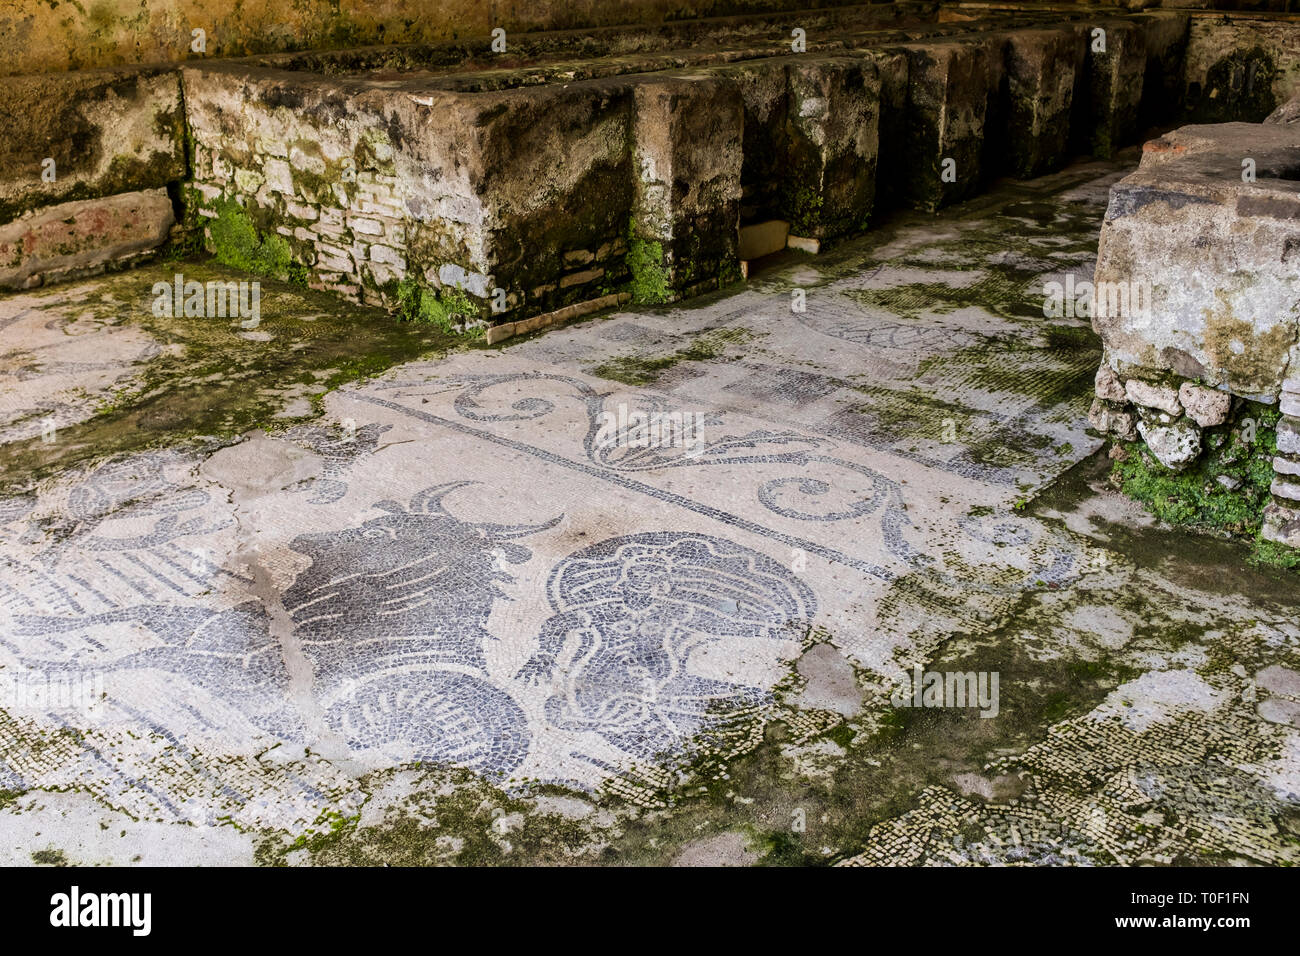 Mosaic details at the Villa Romana, an ancient Roman archaeological site hidden in the village of Minori, Italy on the Amalfi Coast Stock Photo